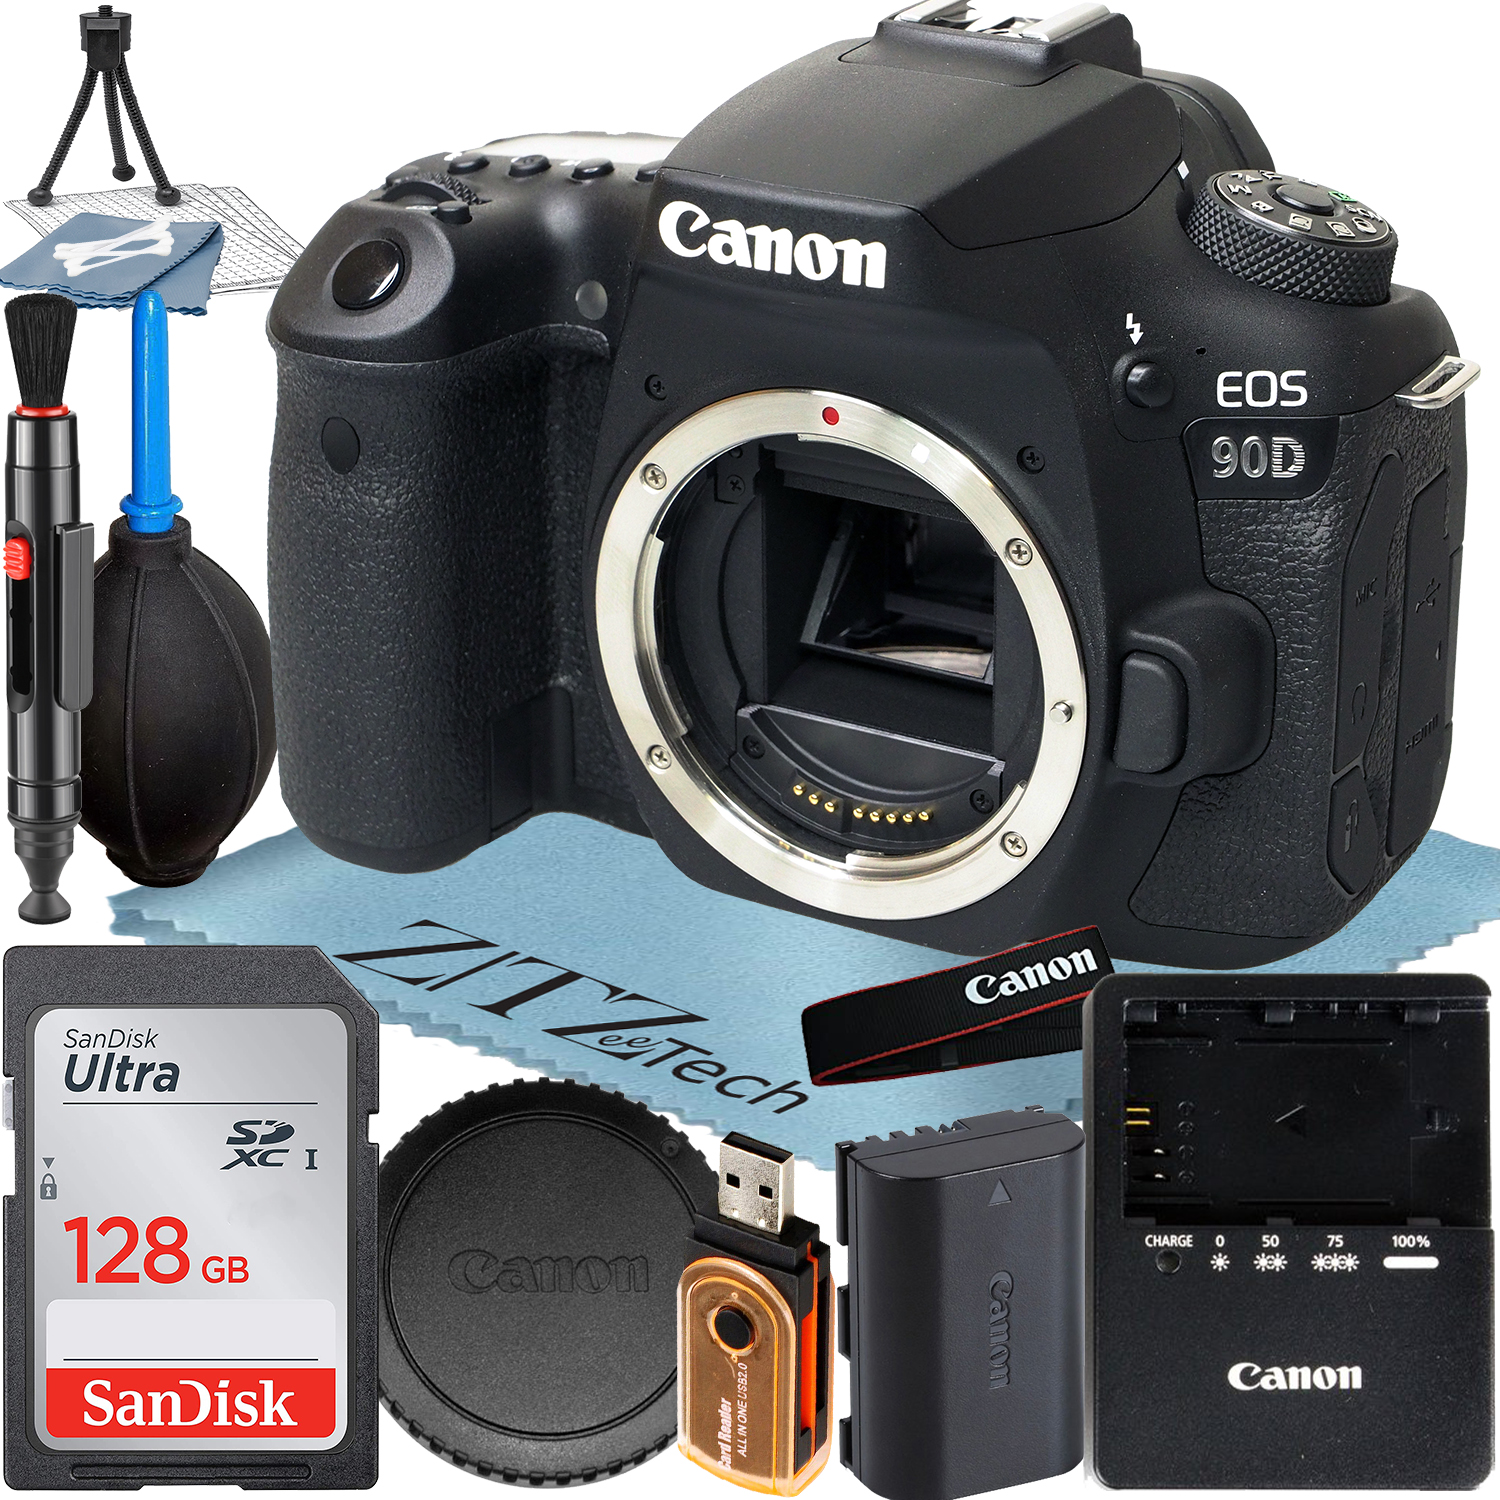 Canon EOS 90D DSLR Camera (Body Only) with 32.5MP CMOS Sensor + SanDisk 128GB Memory Card + ZeeTech Accessory Bundle